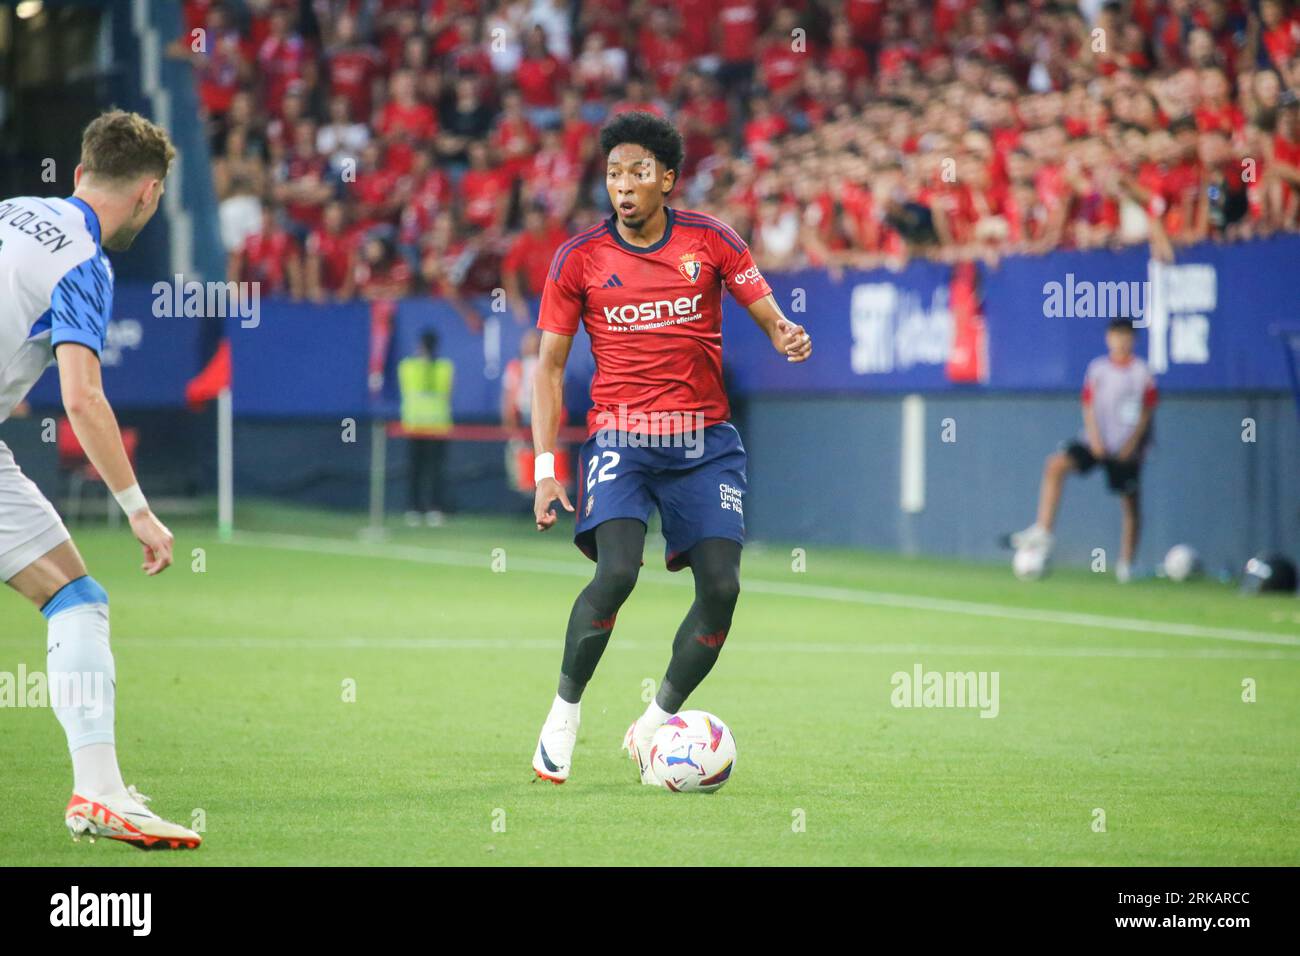 Pamplona, Spain, 24th August, 2023: CA Osasuna's player Johan Mojica (22) with the ball during the first leg match of the UEFA Europa Conference League 2023-24 Preliminary Round between CA Osasuna and Club Brugge in the El Sadar Stadium, in Pamplona, on August 24, 2023. Credit: Alberto Brevers / Alamy Live News. Stock Photo